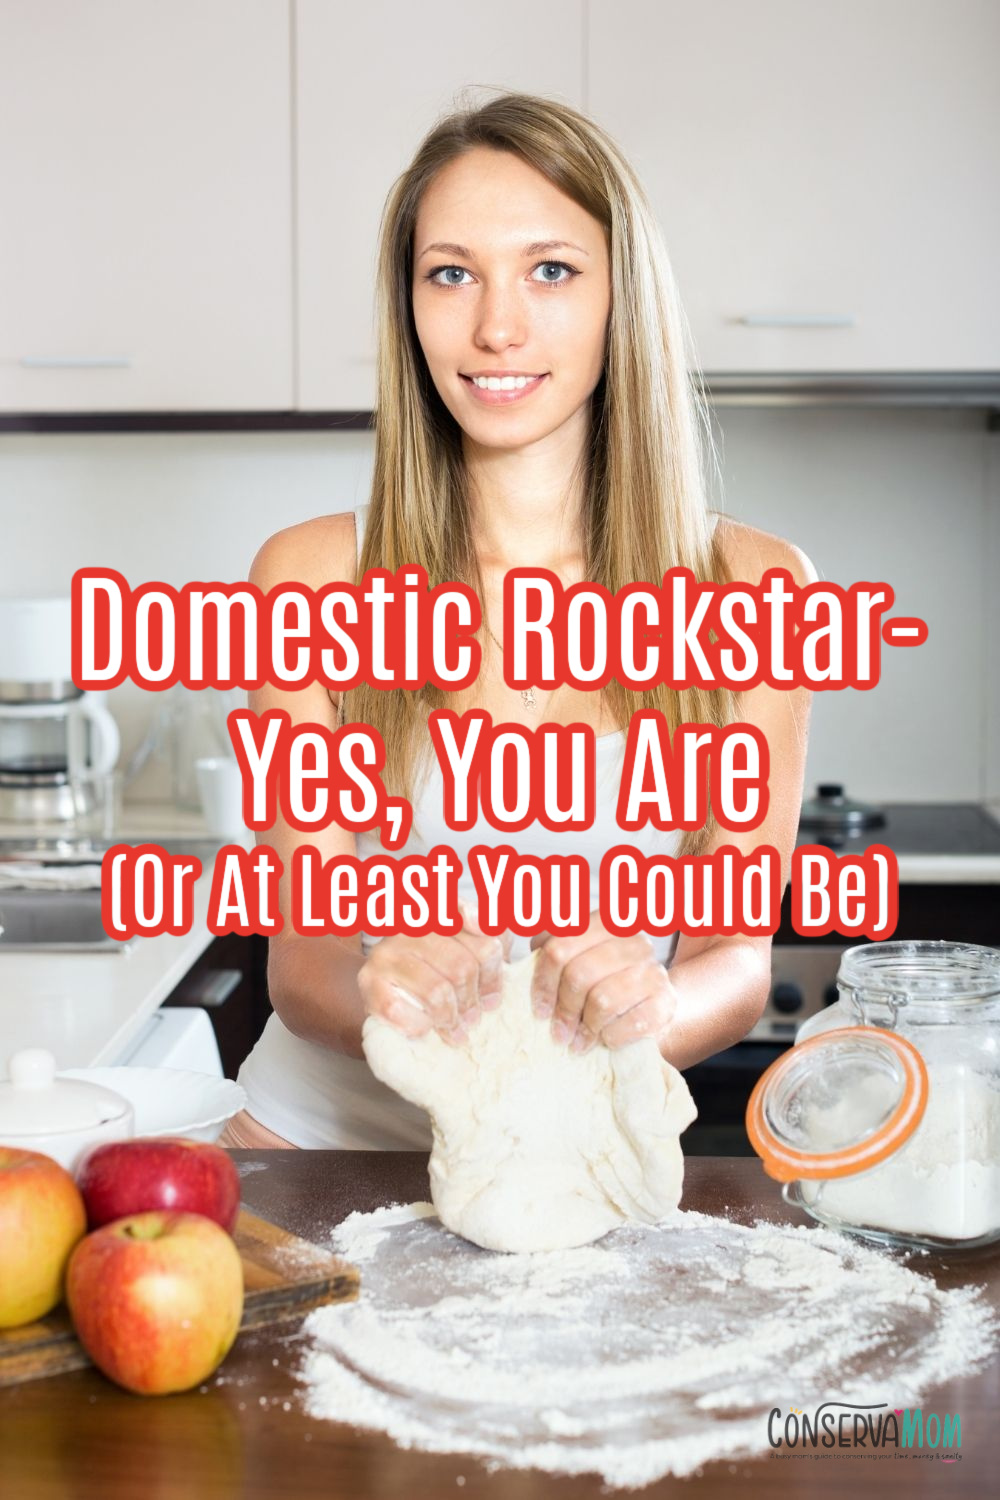 Domestic Rockstar- Yes, You Are (Or At Least You Could Be)